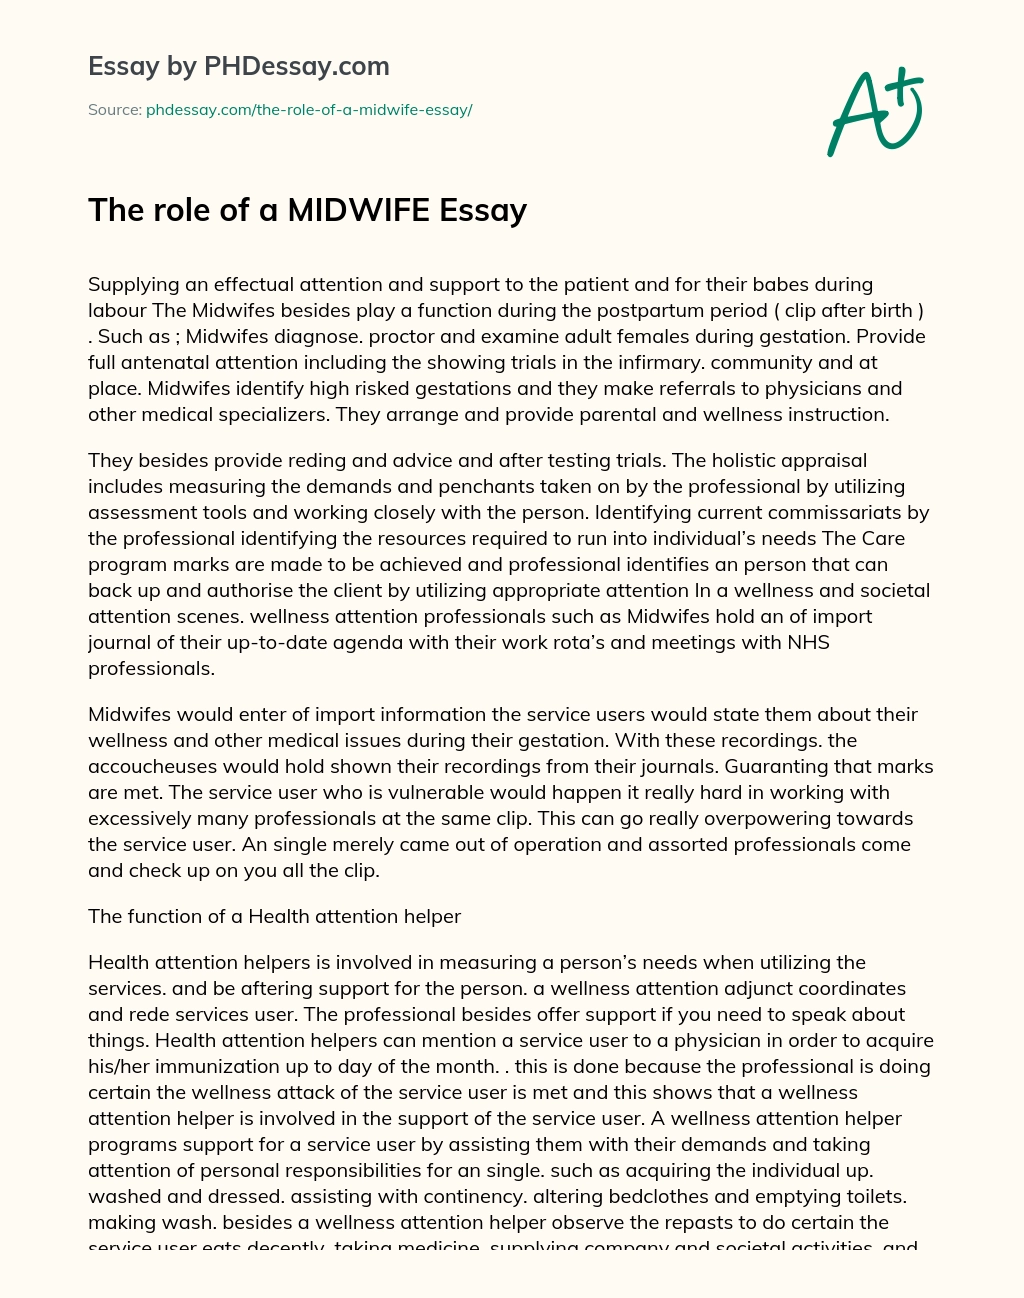 The role of a MIDWIFE Essay essay